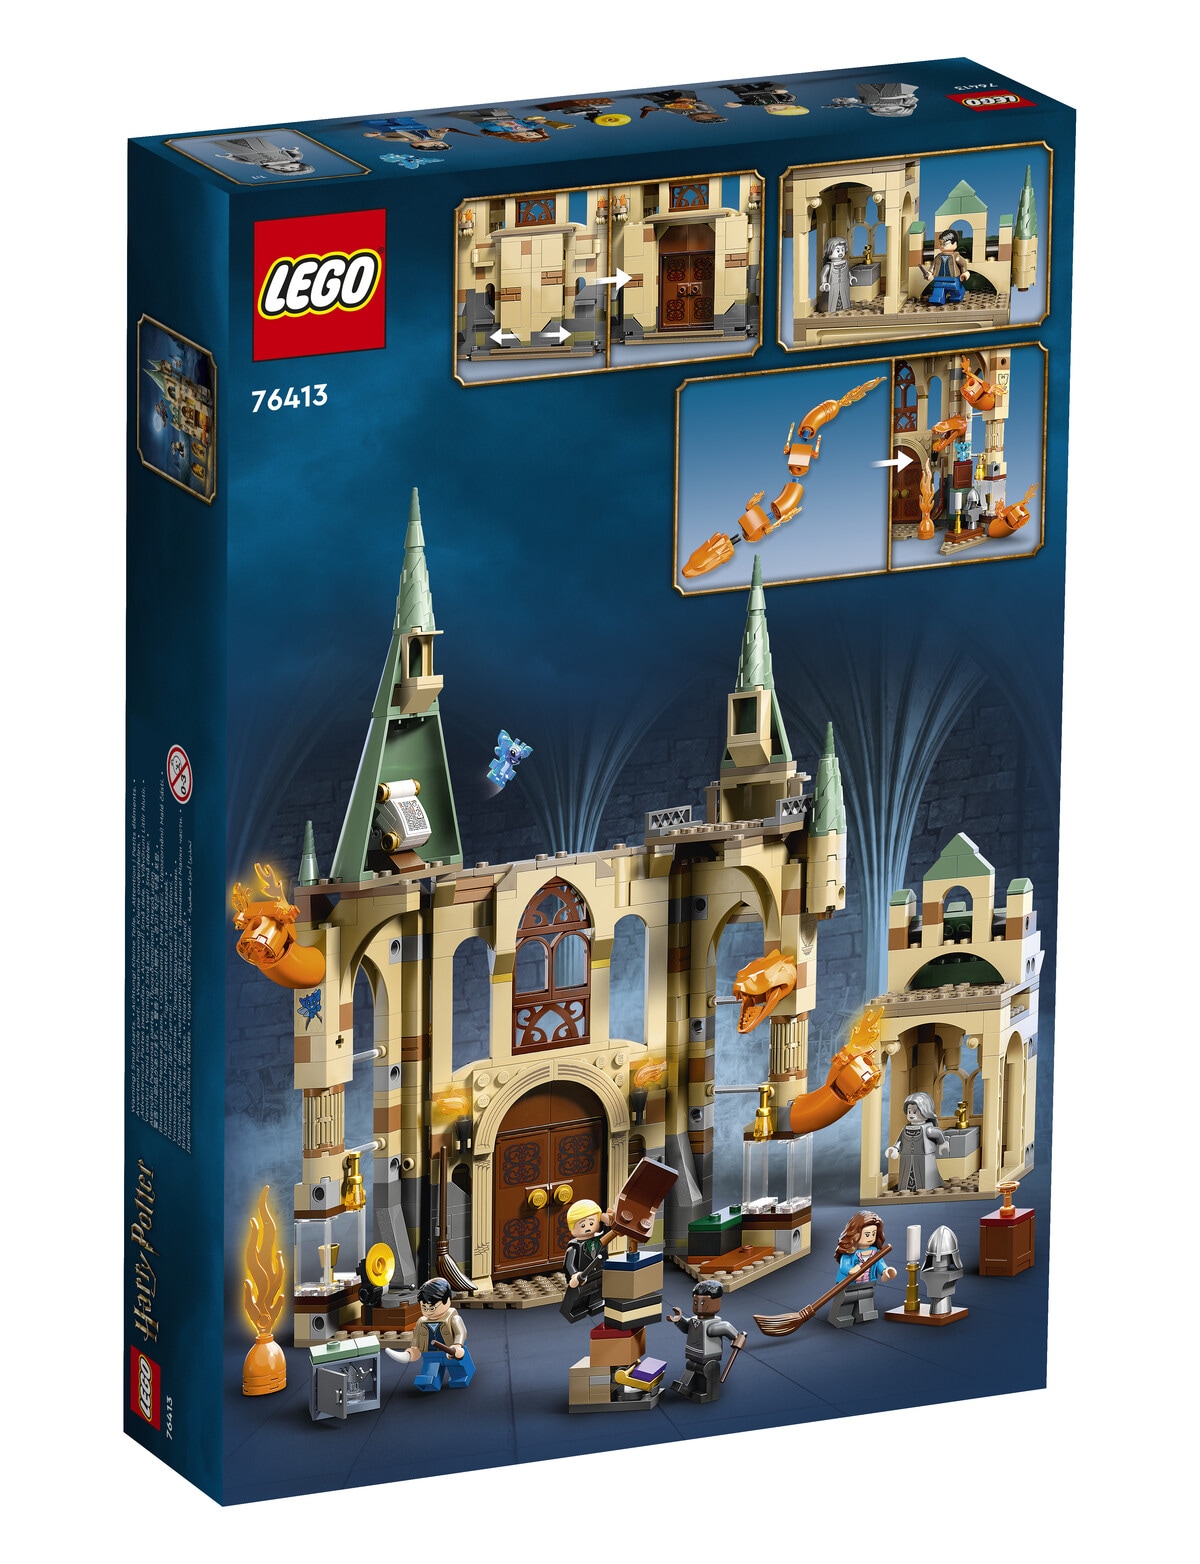 LEGO Harry Potter Hogwarts Review and Rules - Geeky Hobbies